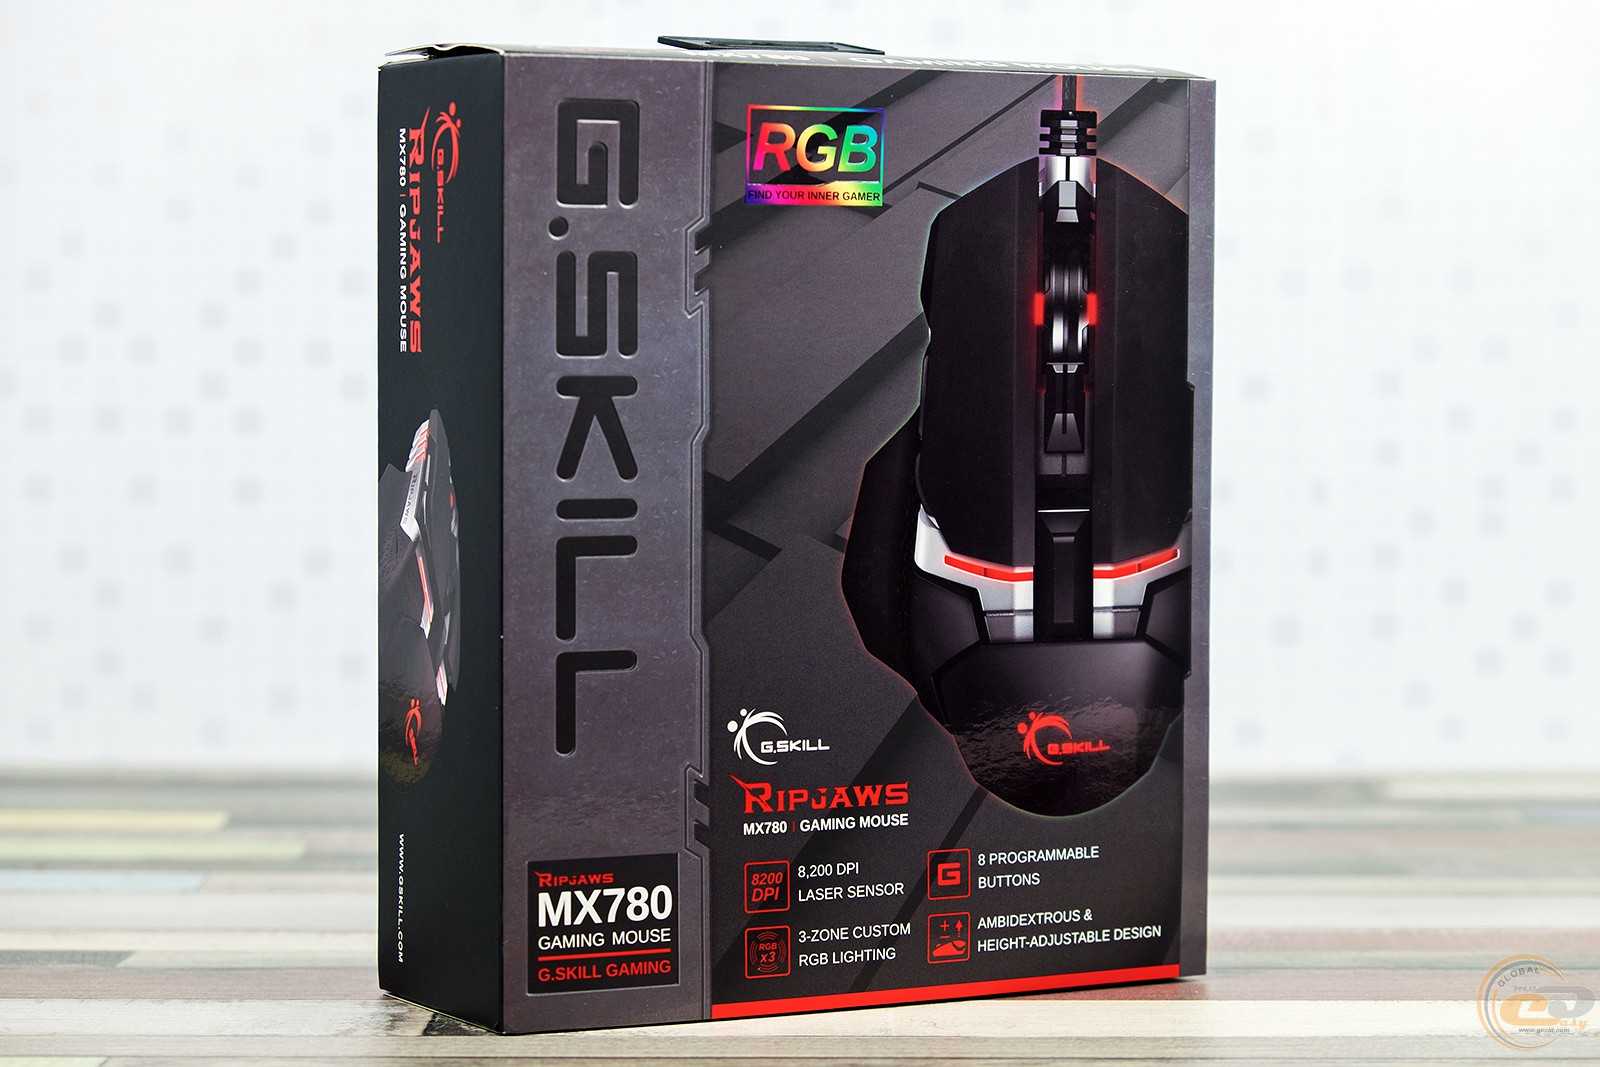 G.skill mx780 review: g.skill's debut mouse is a great start | pcworld